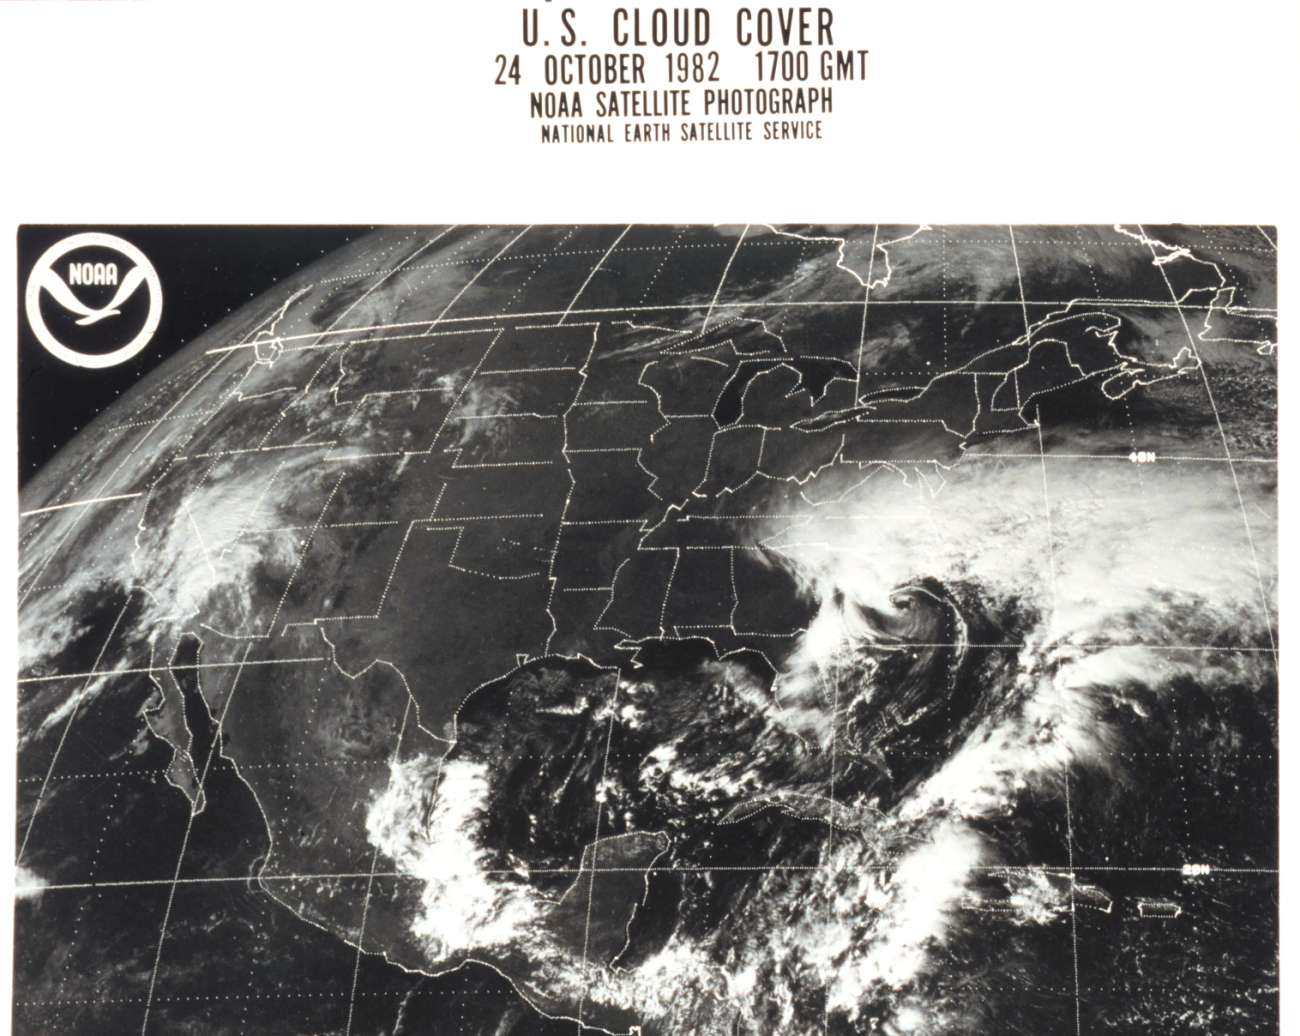 GOES image of North America with storm system over North Carolina and frontalsystem off the East Coast